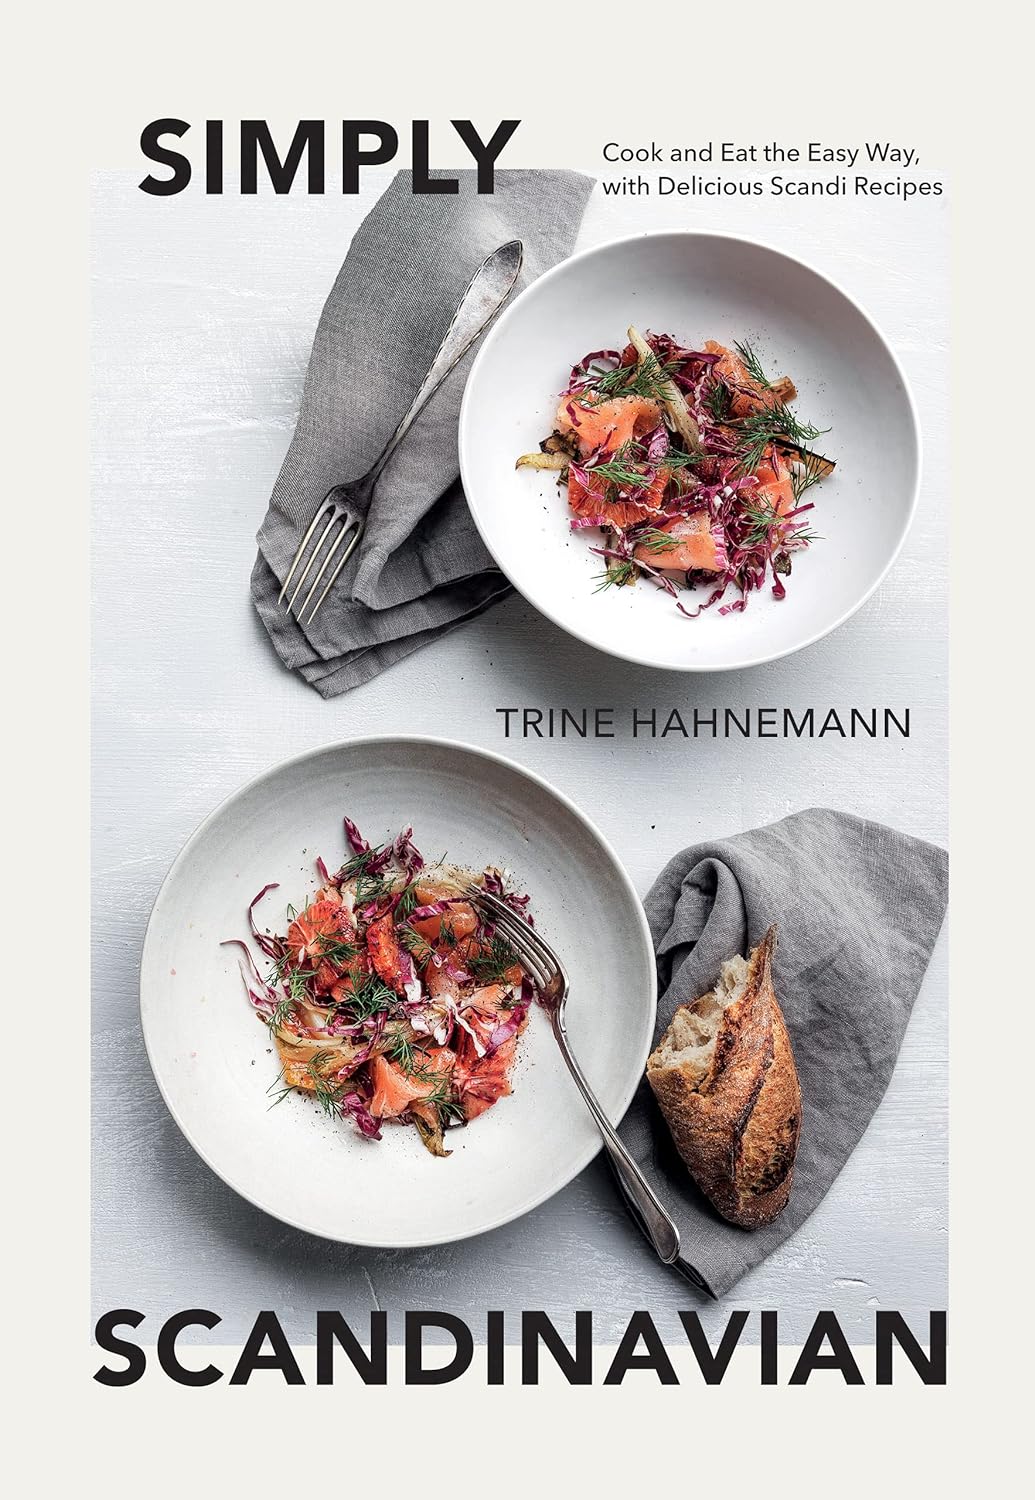 Simply Scandinavian: Cook and Eat the Easy Way, with Delicious Scandi Recipes by Trine Hahnemann